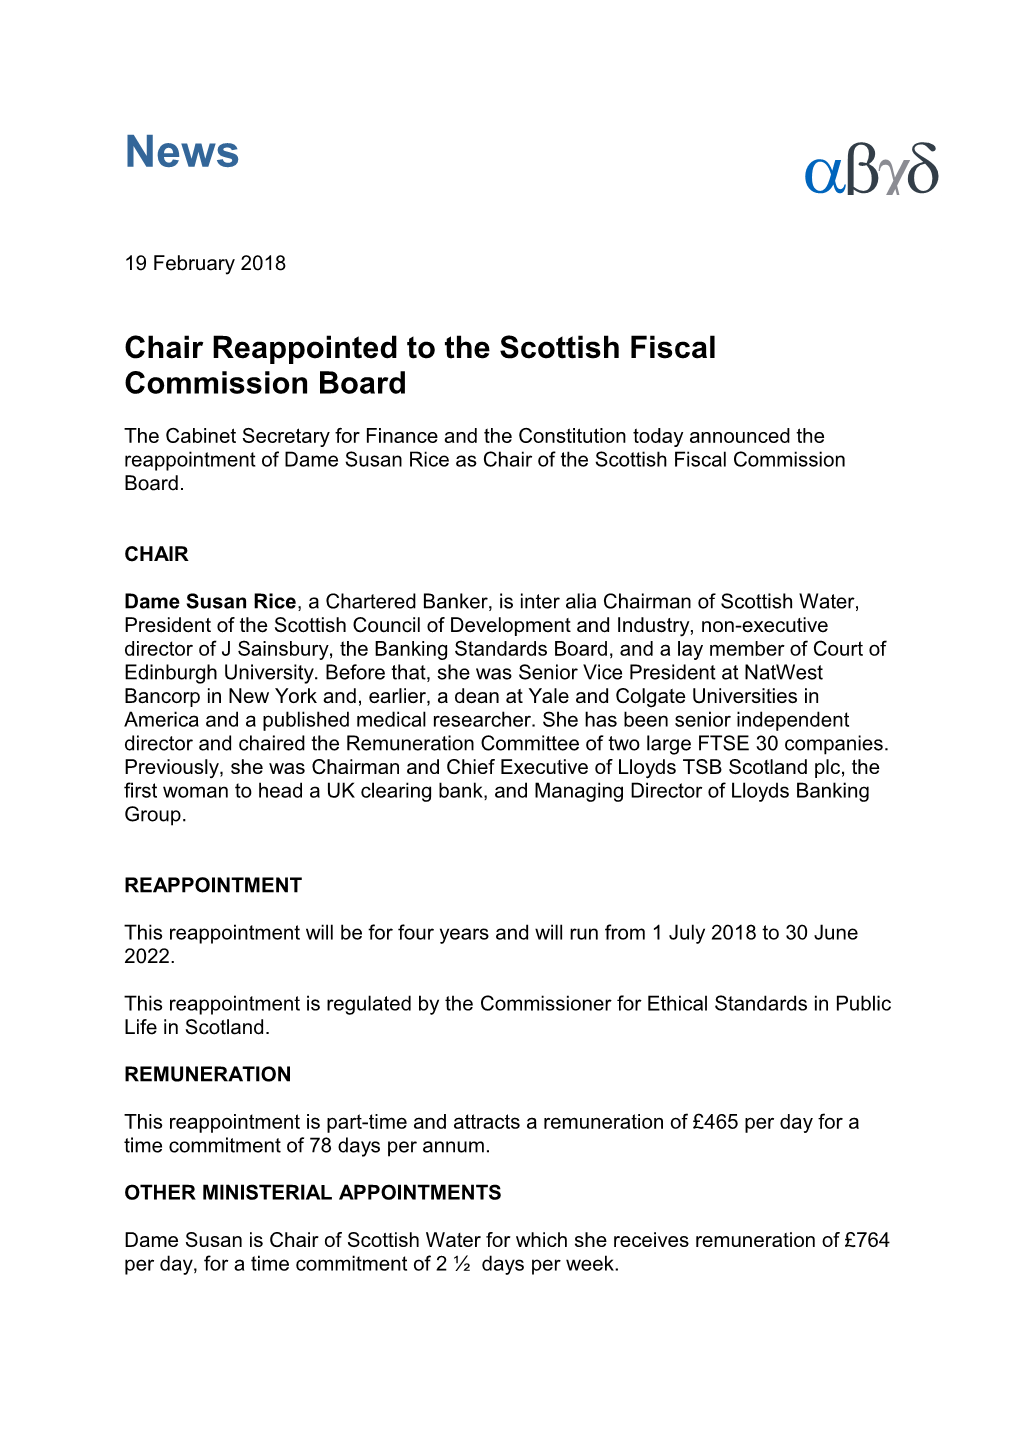 Chair Reappointed to the Scottish Fiscal Commission Board